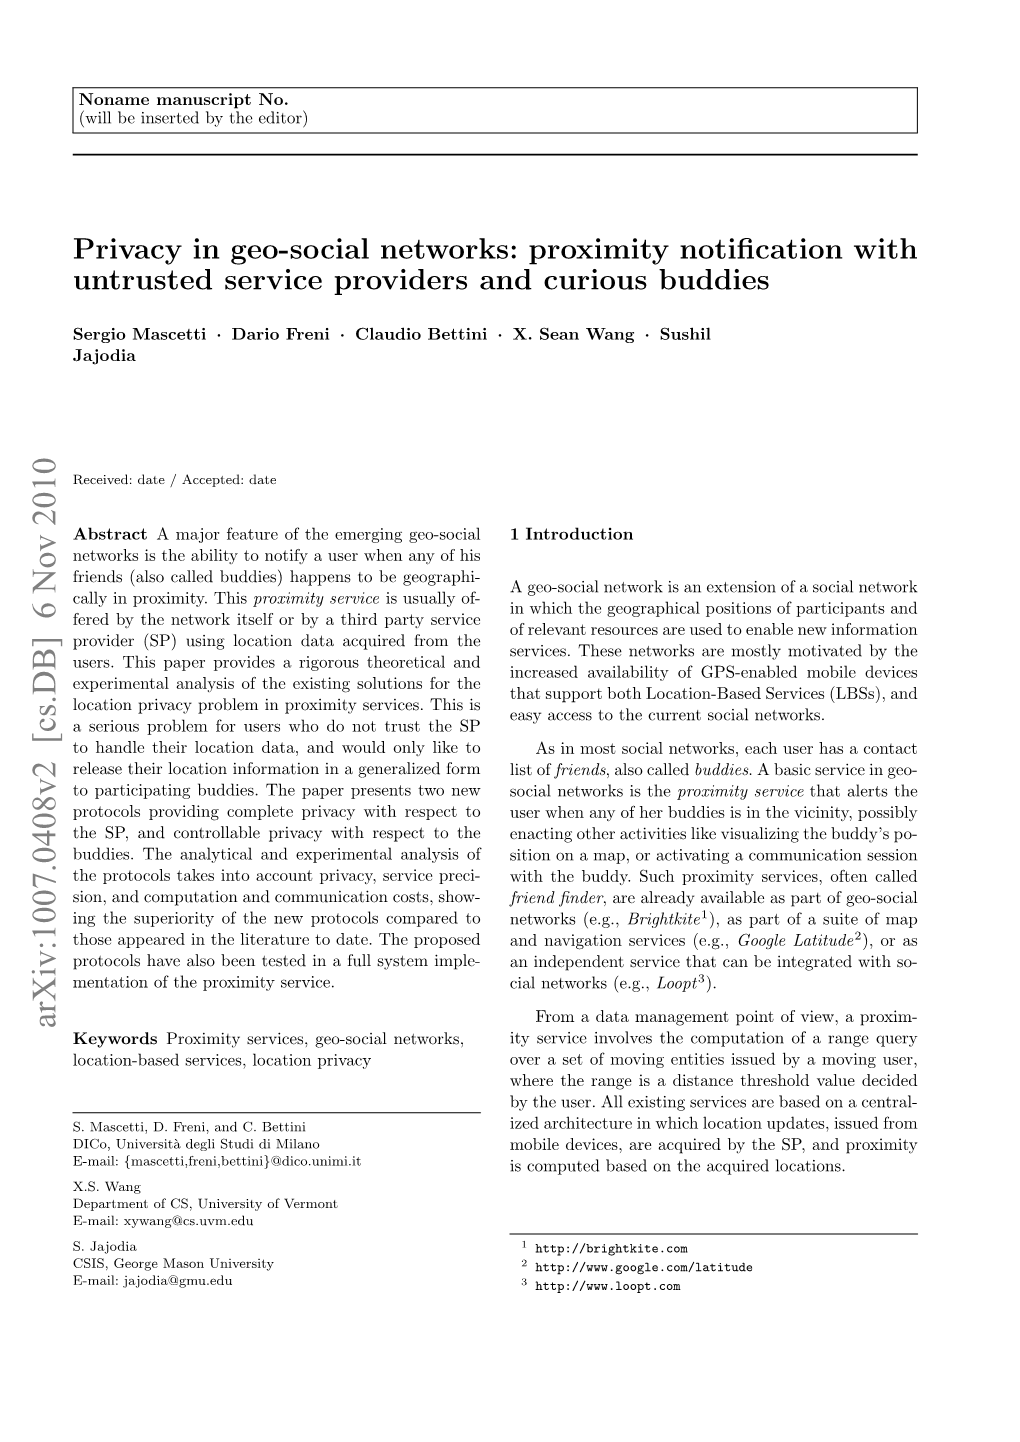 Privacy in Geo-Social Networks: Proximity Notification with Untrusted